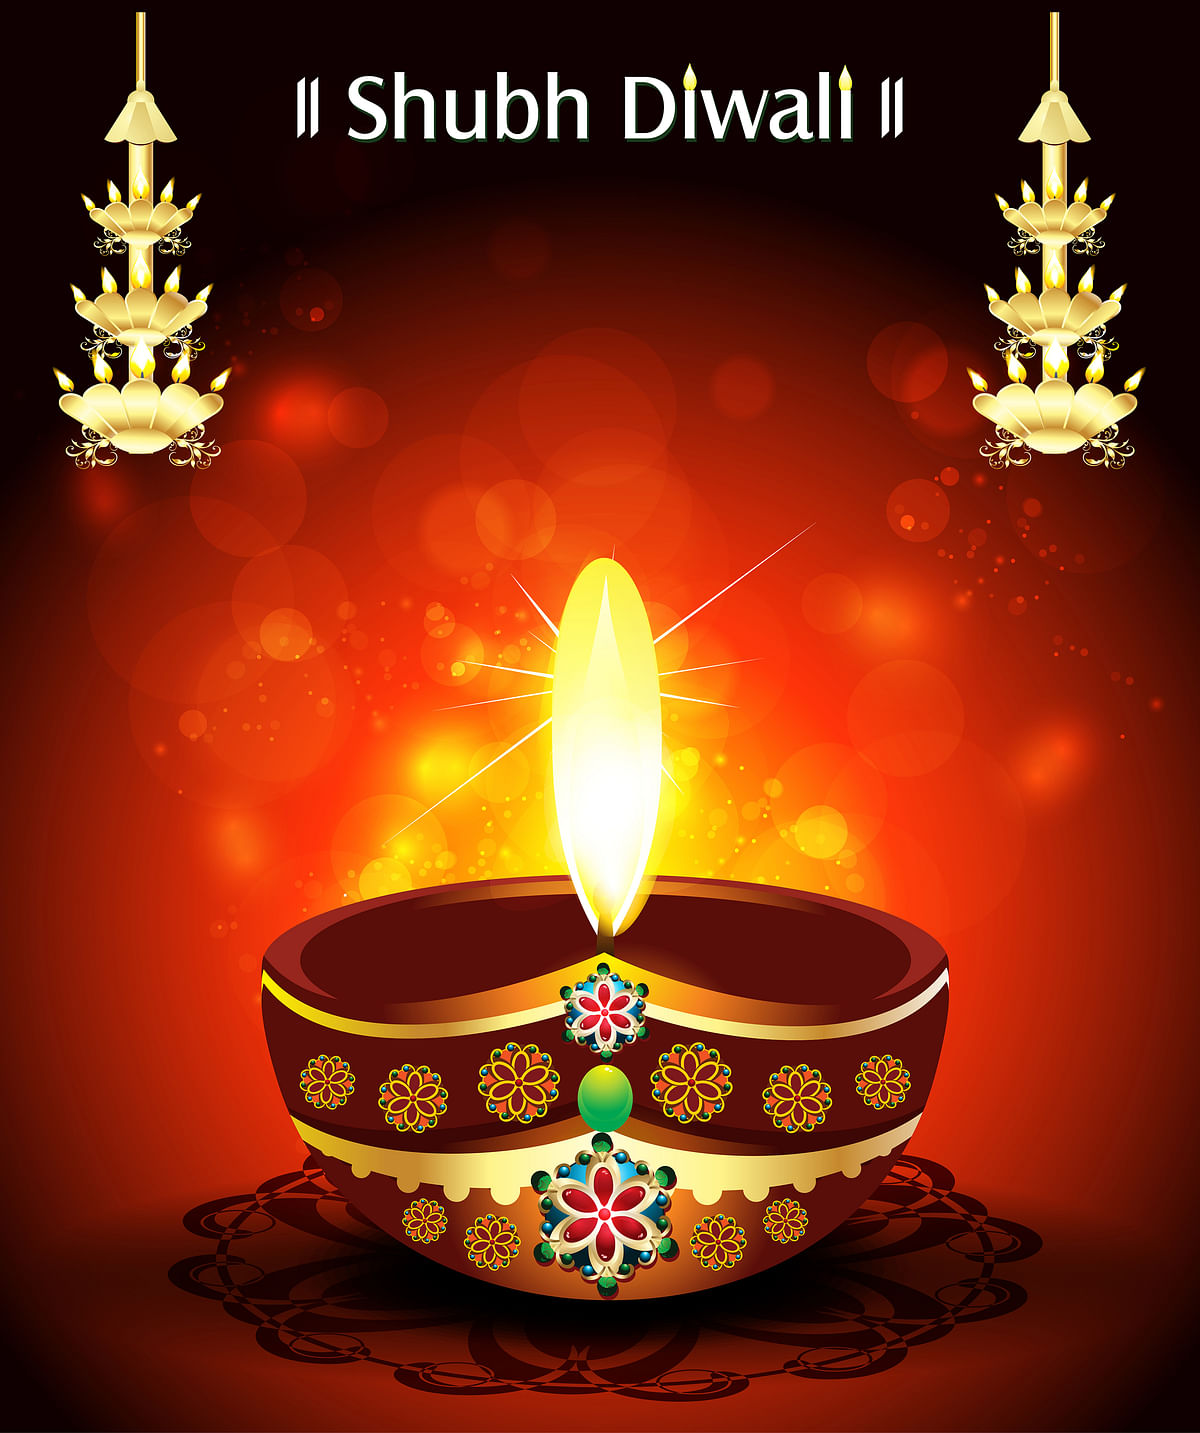 This Diwali, do away with the diyas – celebrate with some fun, awesome games.